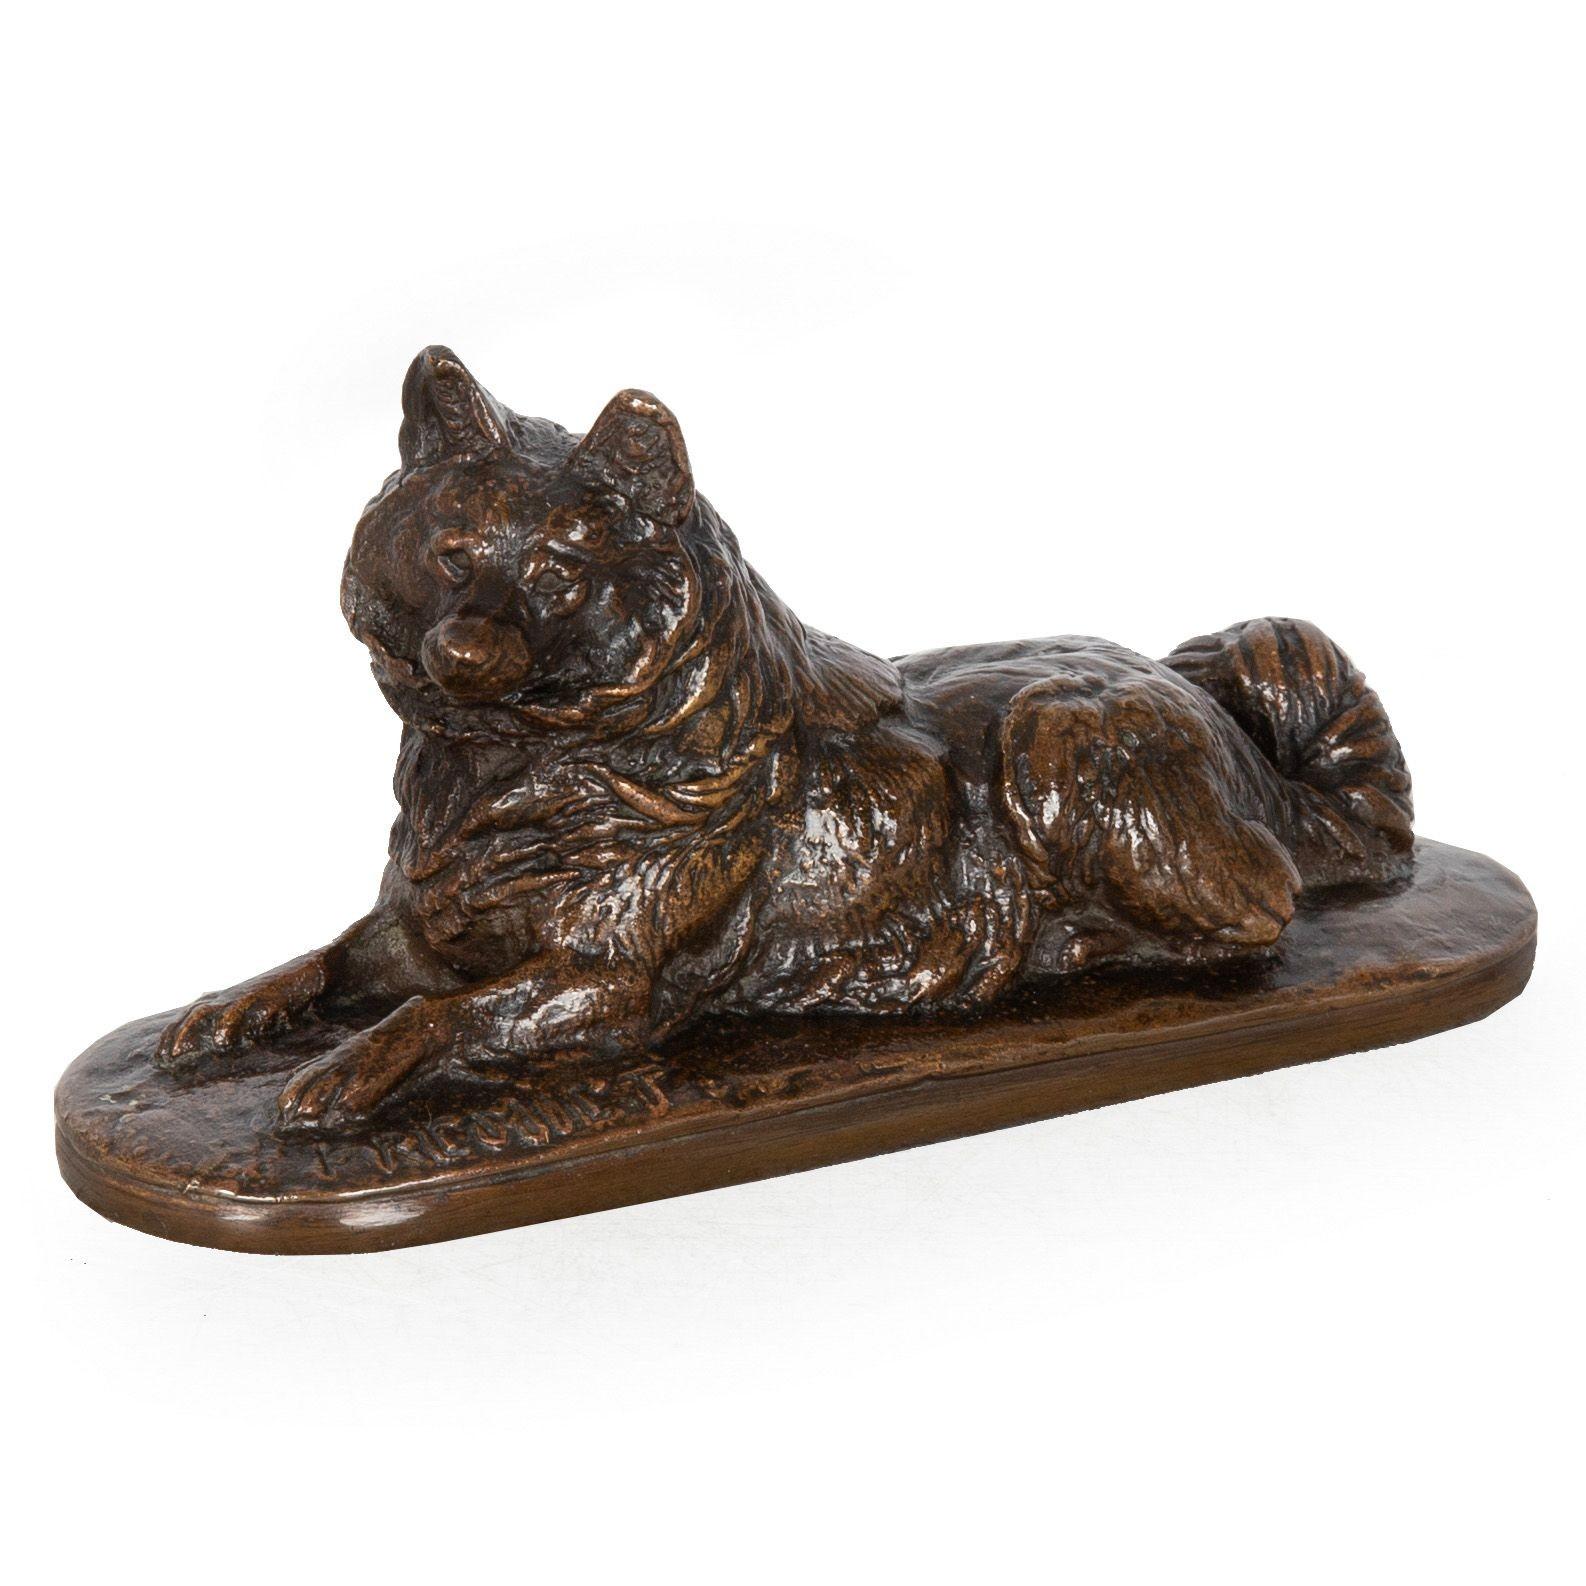 EMMANUEL FREMIET
French, 1824-1910

Chien loulou couché

Nuanced medium-brown patina on sand-cast bronze  Signed in base 